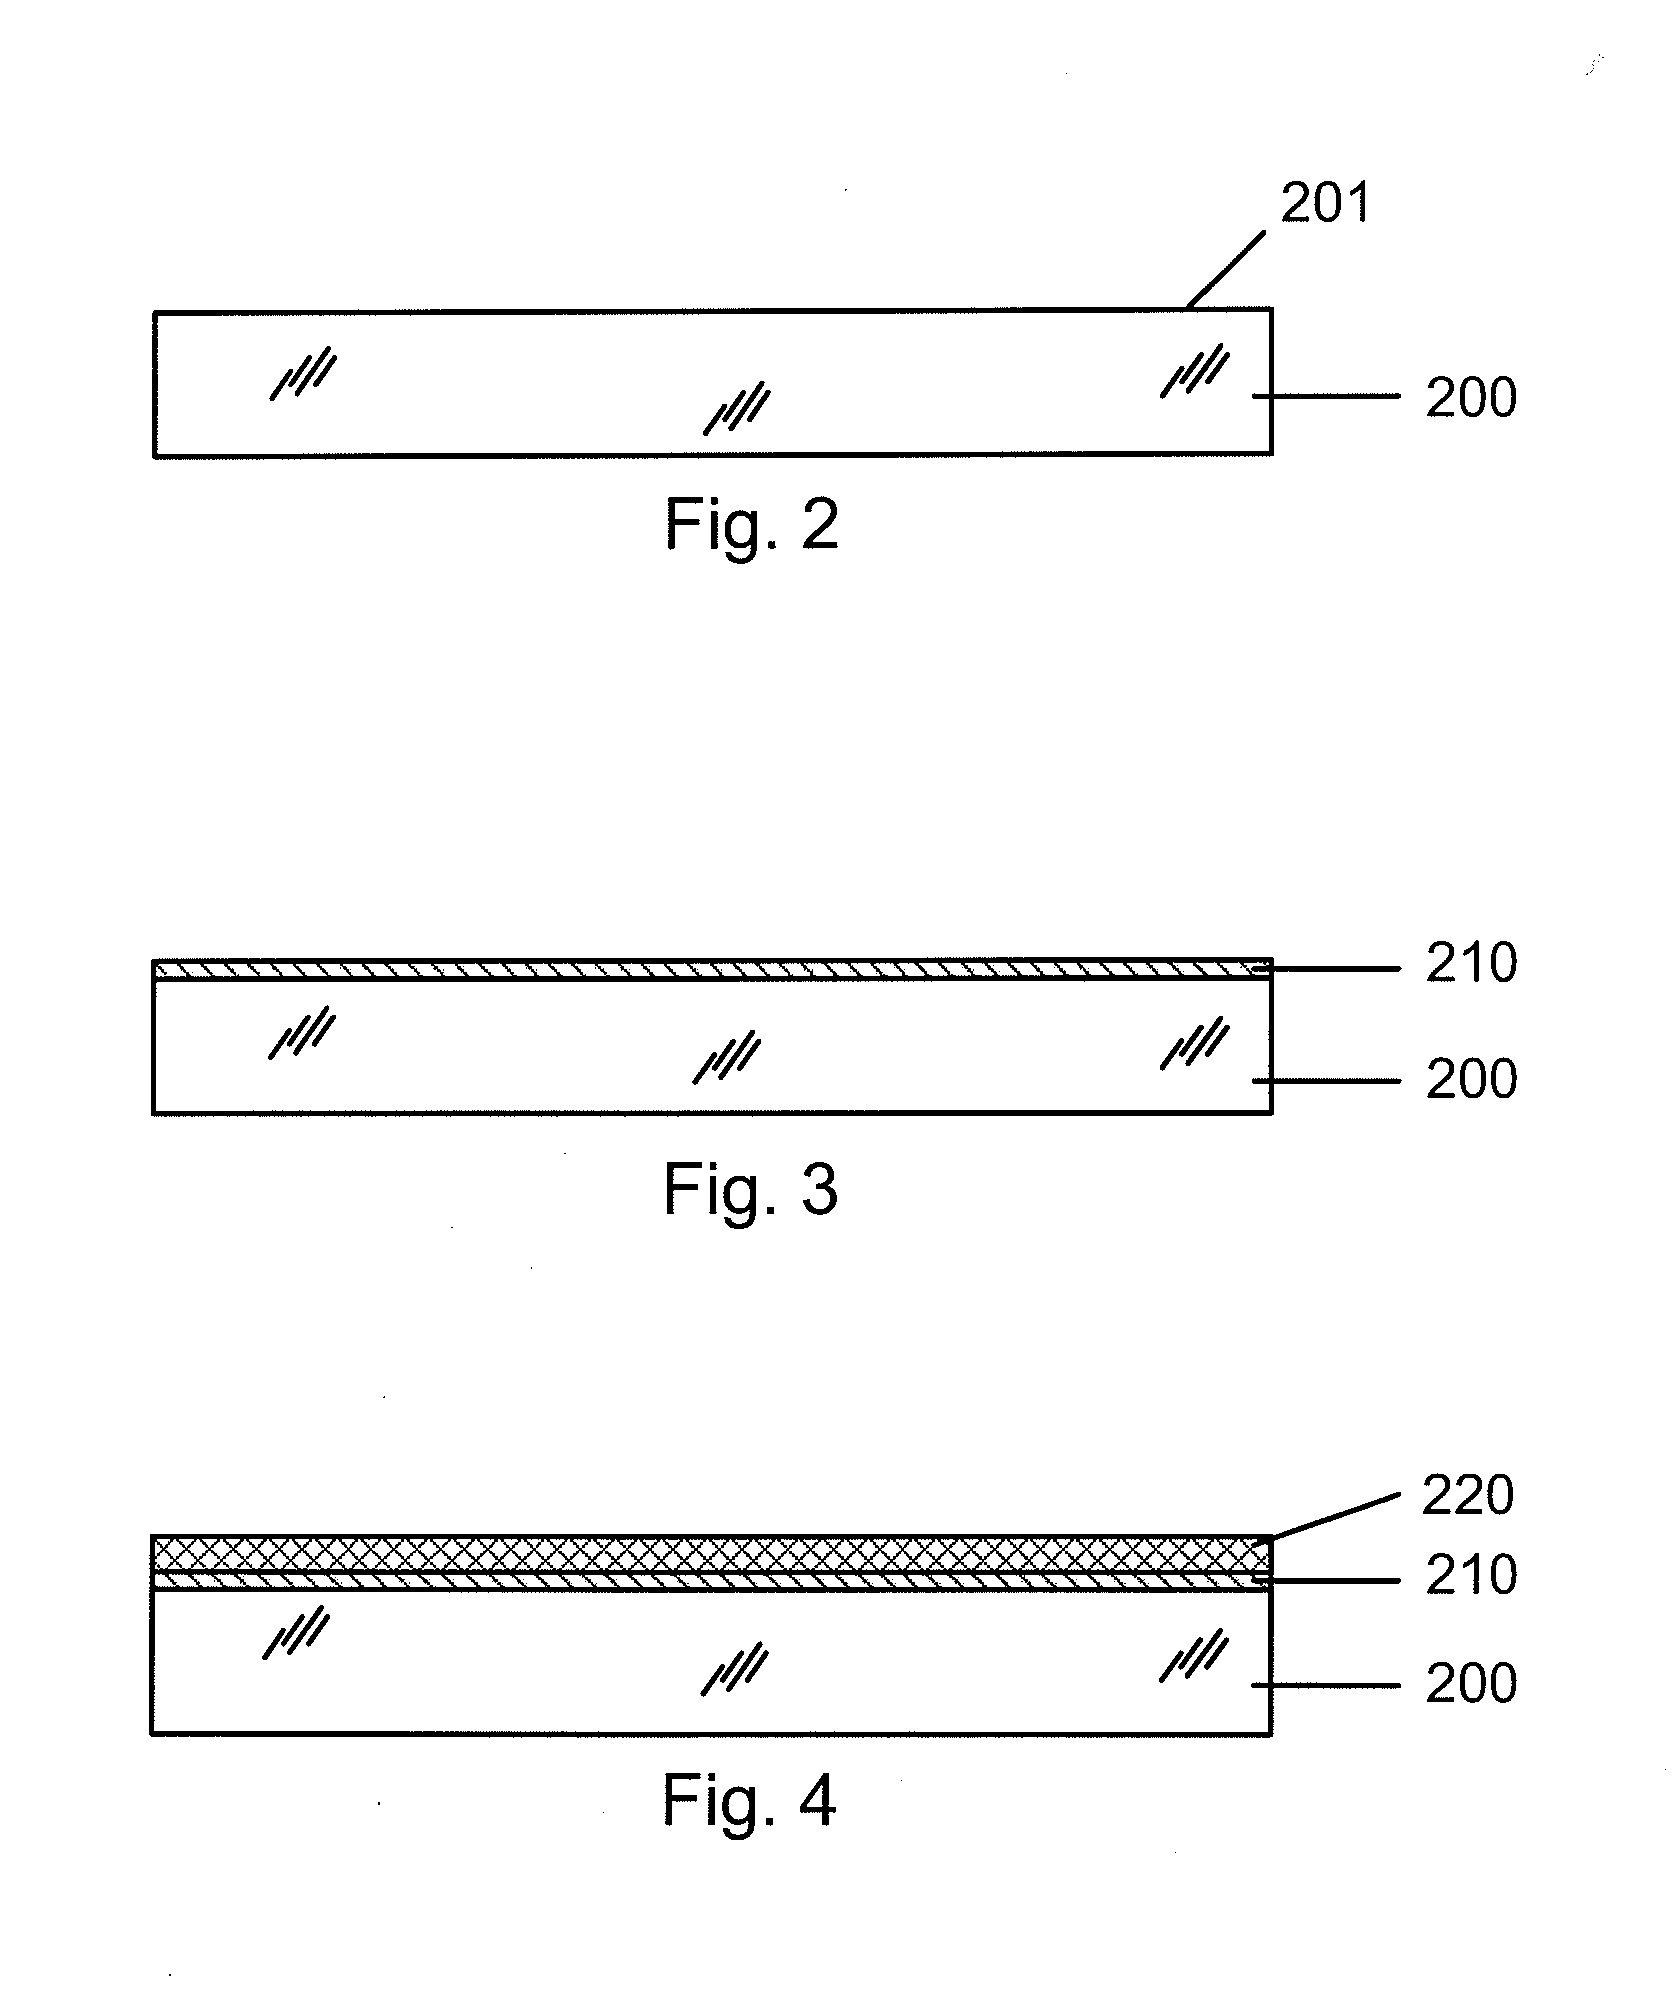 Sodium Sputtering Doping Method for Large Scale CIGS Based Thin Film Photovoltaic Materials